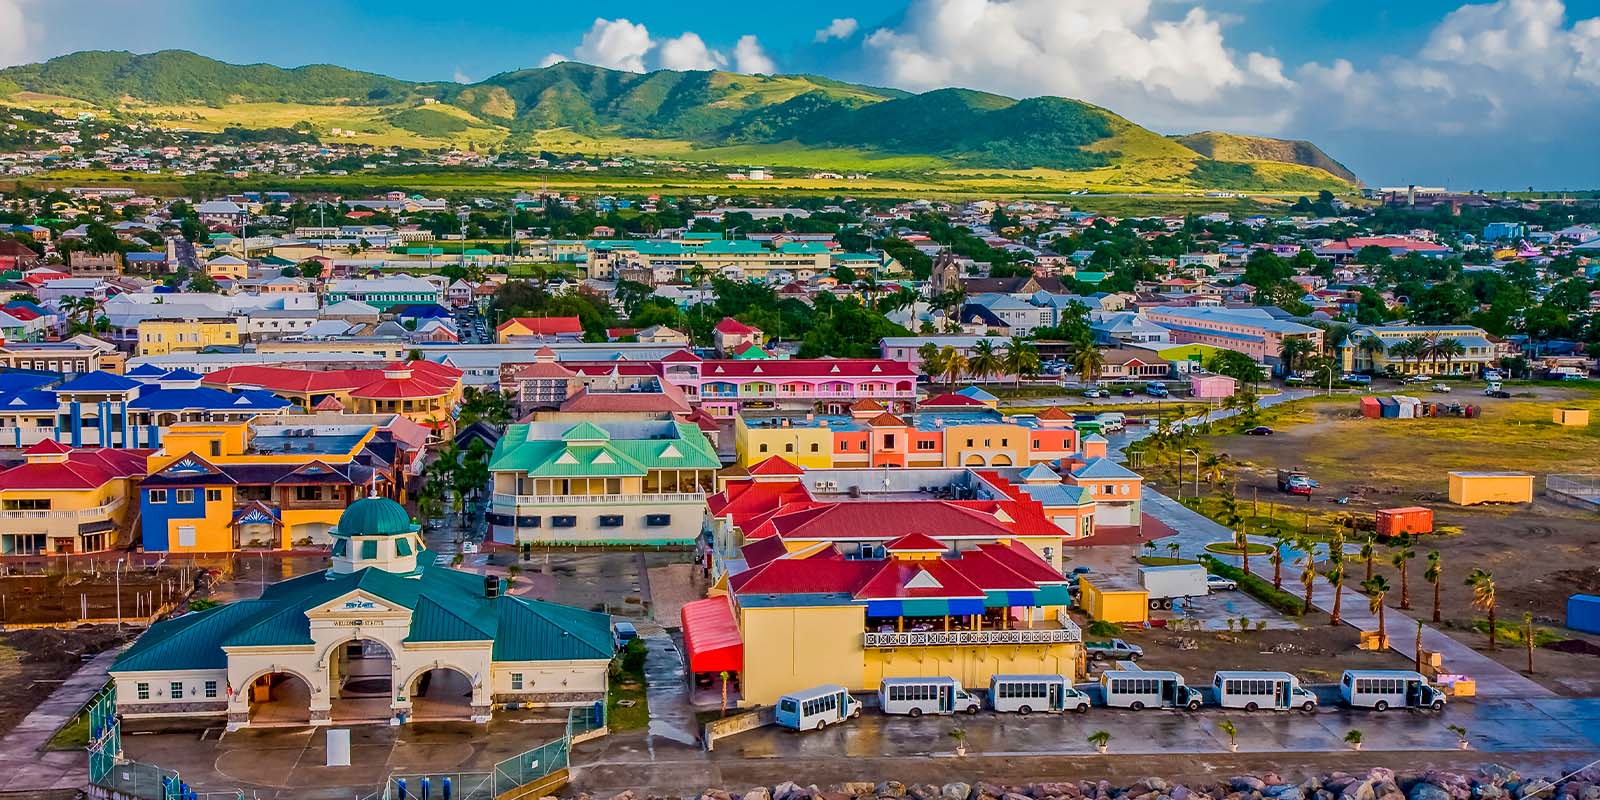 St. Kitts & Nevis Offshore Banking And Trusts: Your Optimal Asset Protection Tools